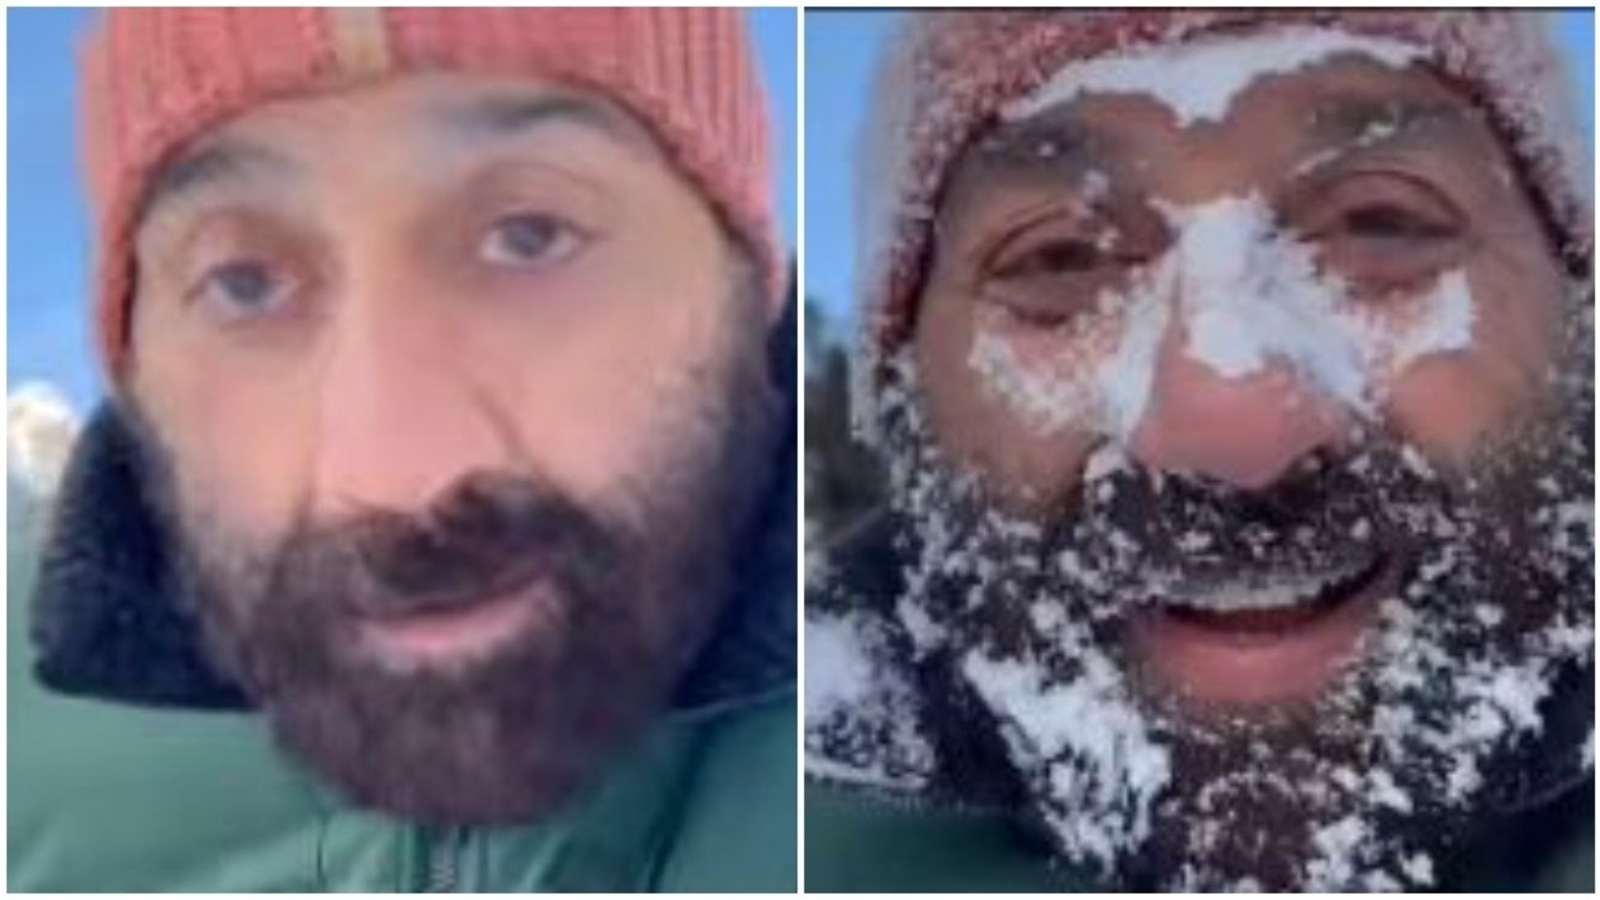 Sanideolxxx - Sunny Deol puts face in snow, calls it 'icing on cake'; leaves Esha in  splits | Bollywood - Hindustan Times